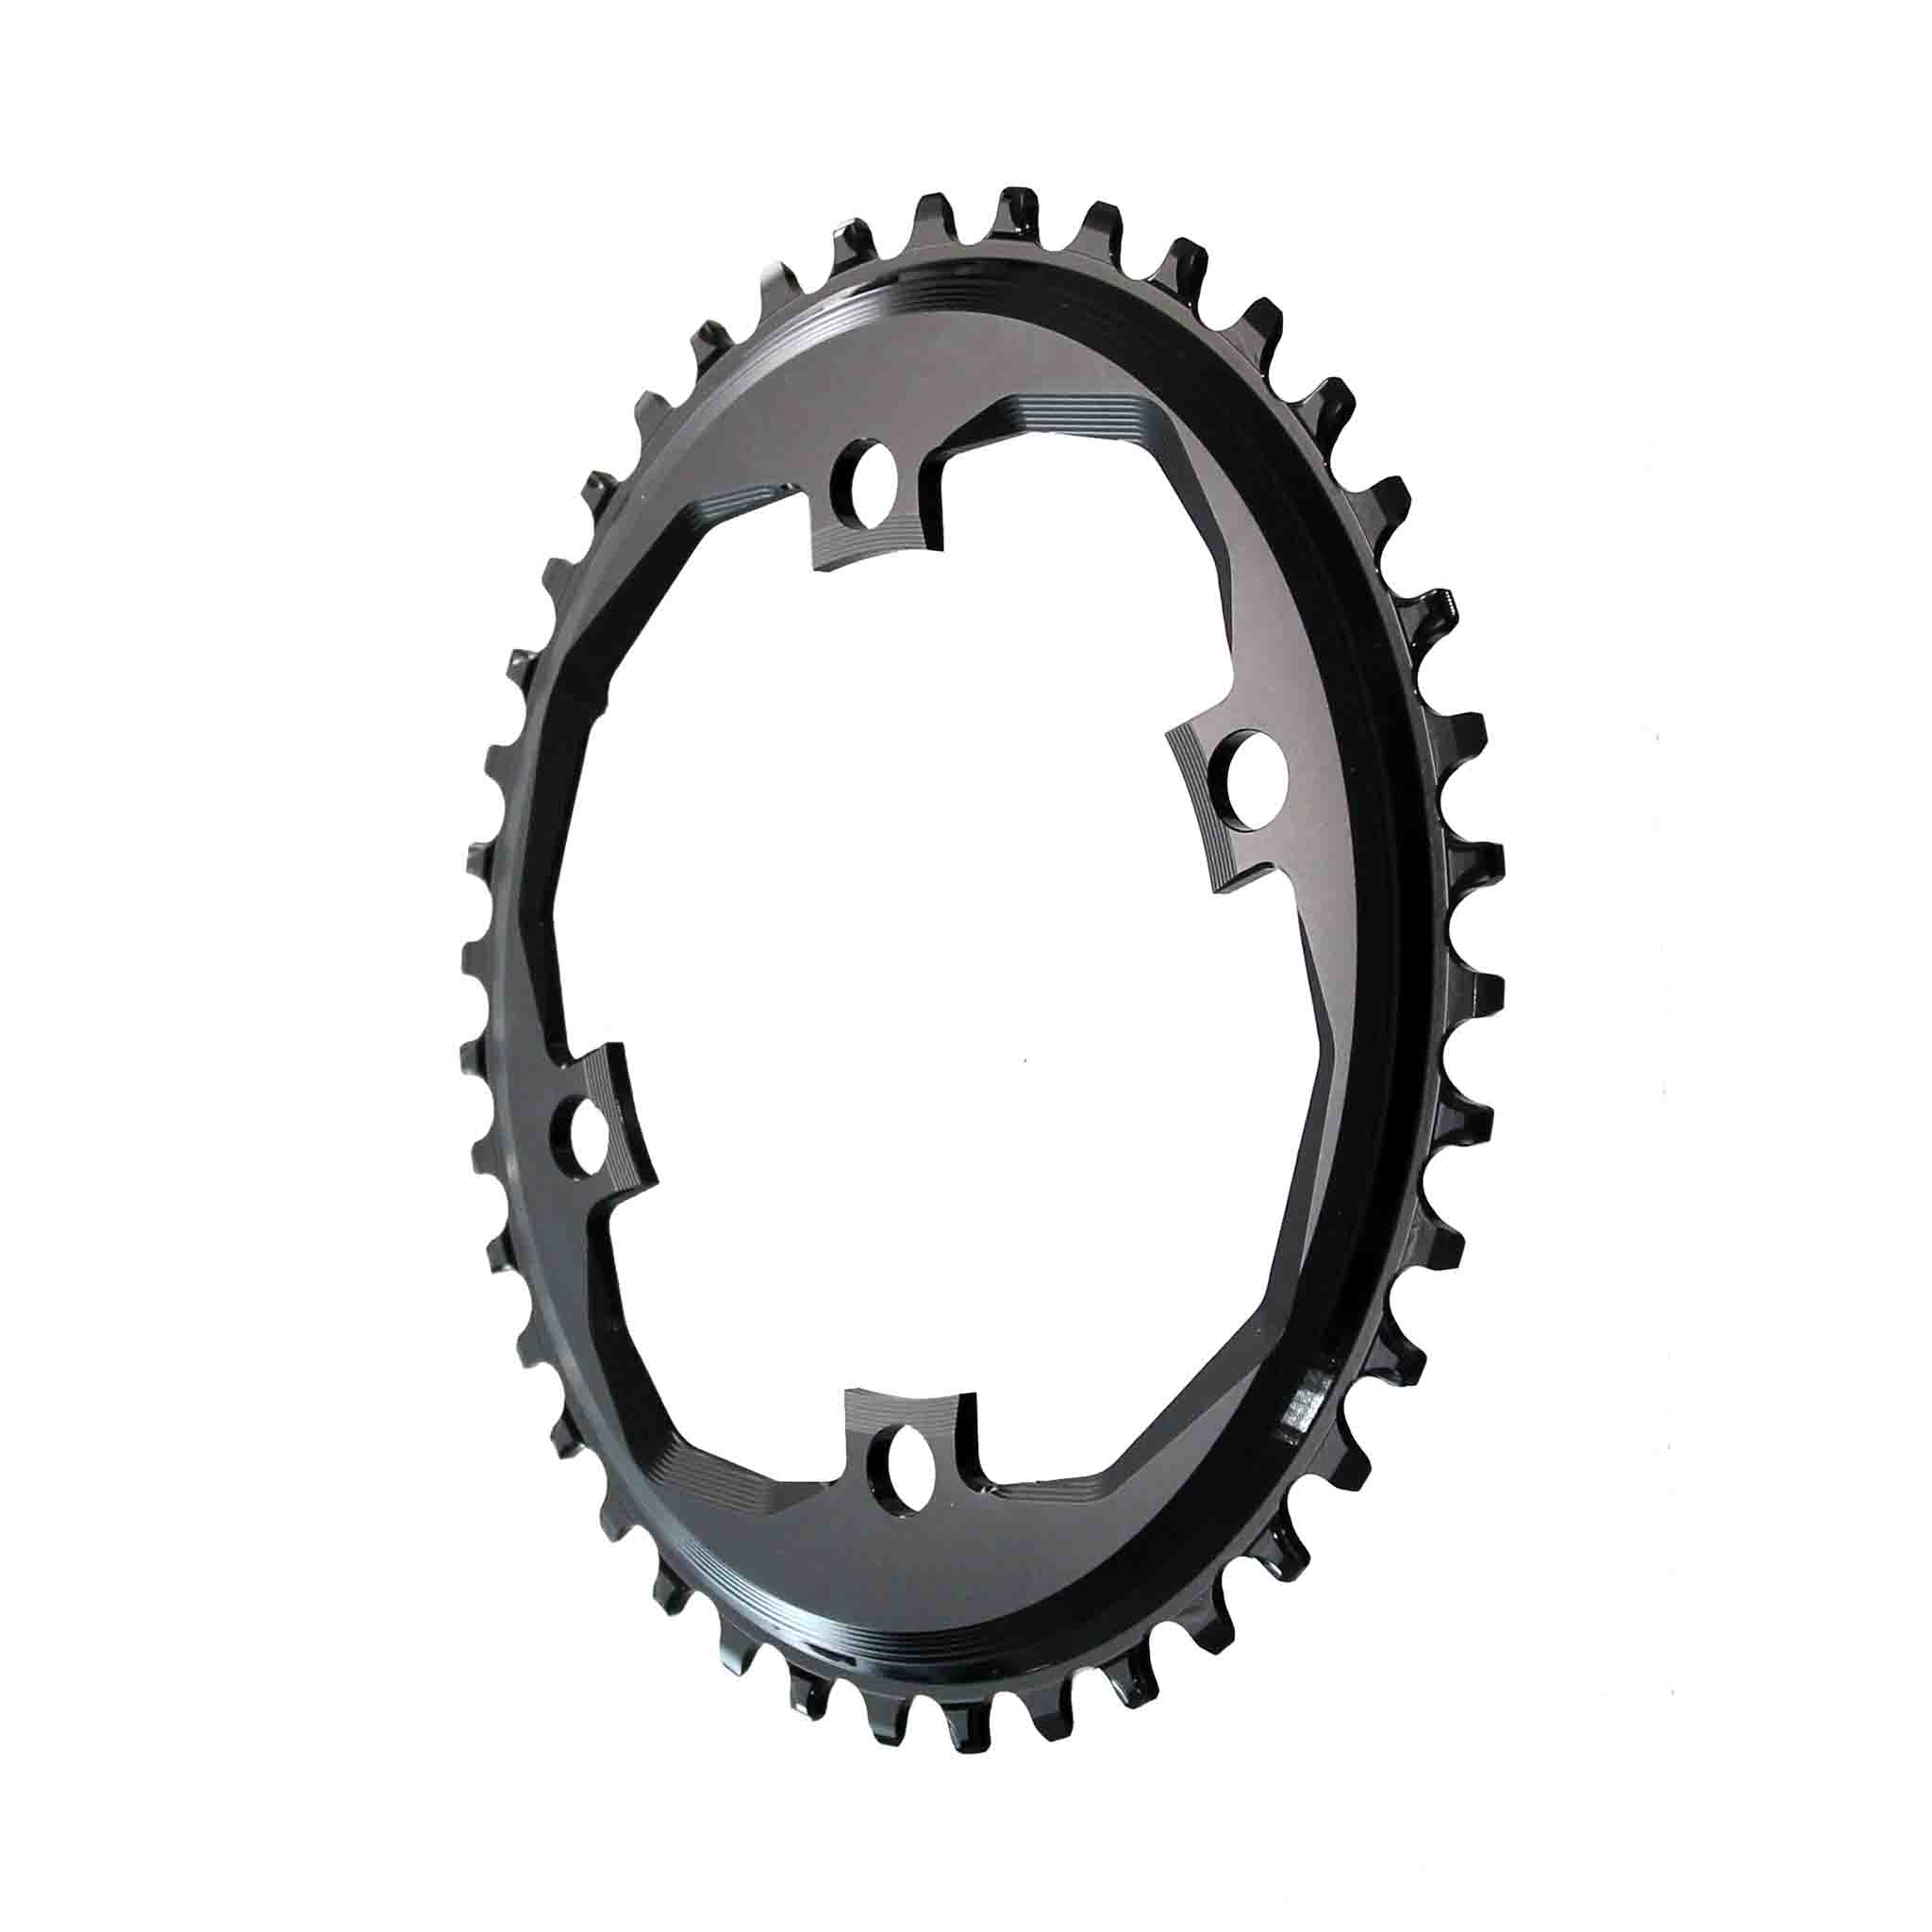 Absolute Black Oval Traction Chainring, 4x110mm Apex1 42T - Black